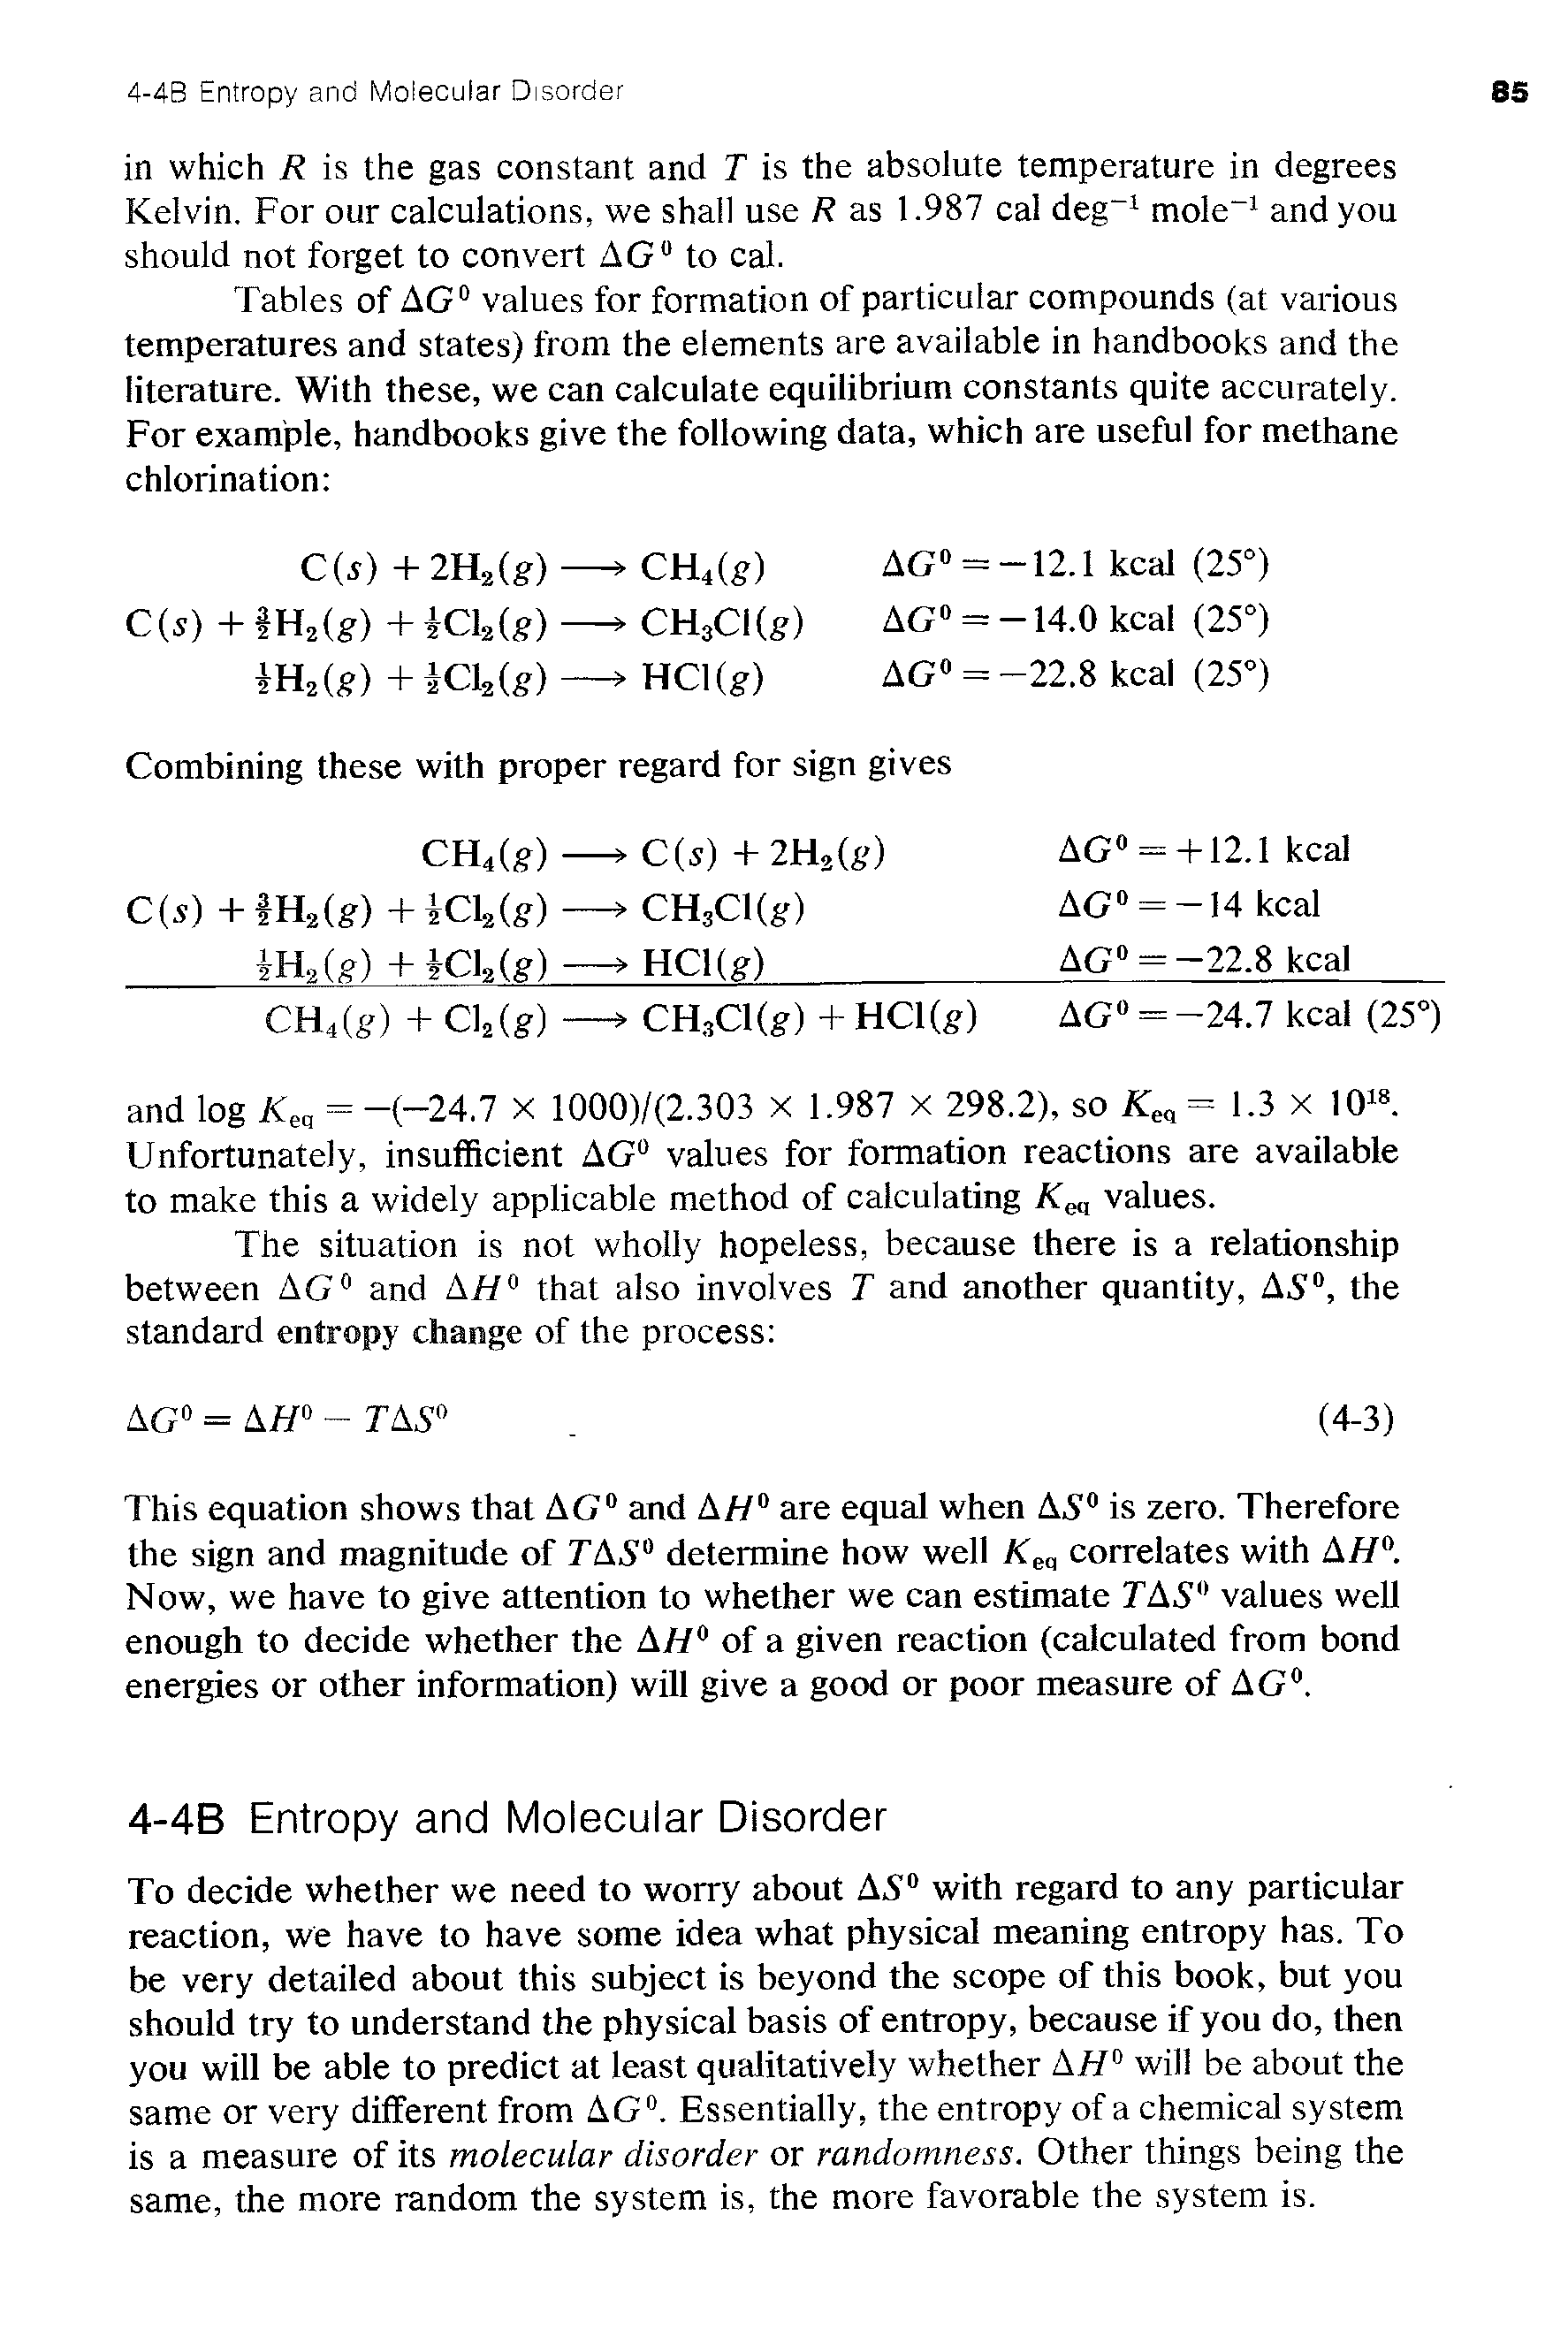 Tables of AG° values for formation of particular compounds (at various temperatures and states) from the elements are available in handbooks and the literature. With these, we can calculate equilibrium constants quite accurately. For example, handbooks give the following data, which are useful for methane chlorination ...